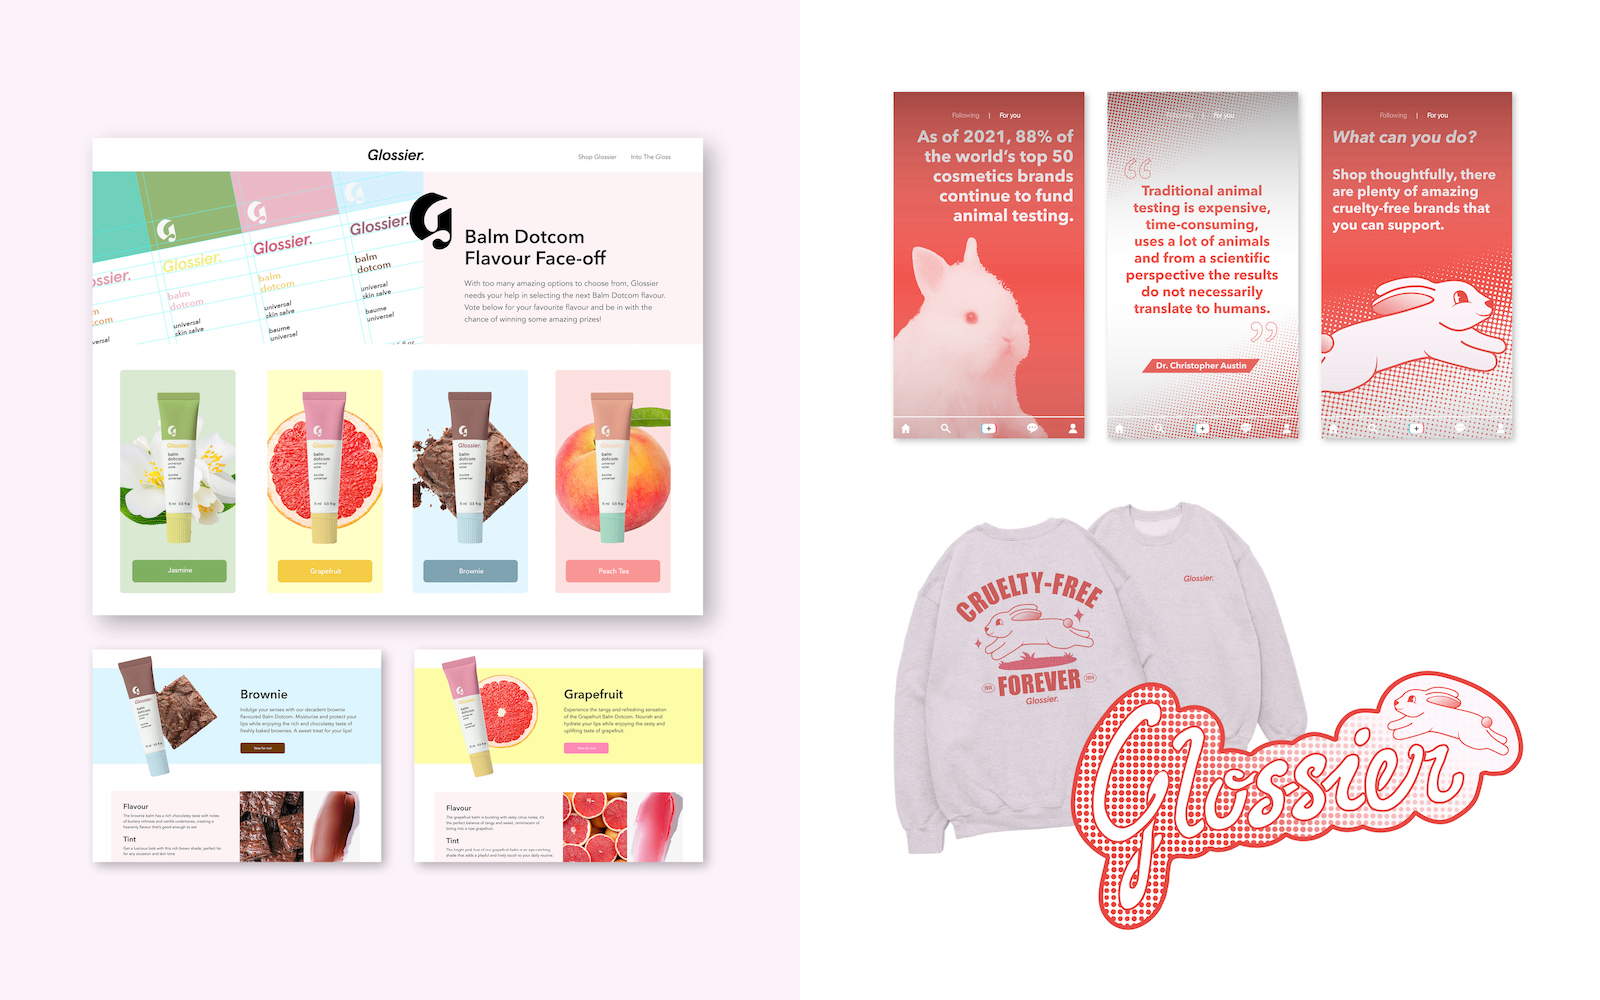 A wide selection of assets including stickers, merch, TikToks and web pages, all designed by Elle Hart.